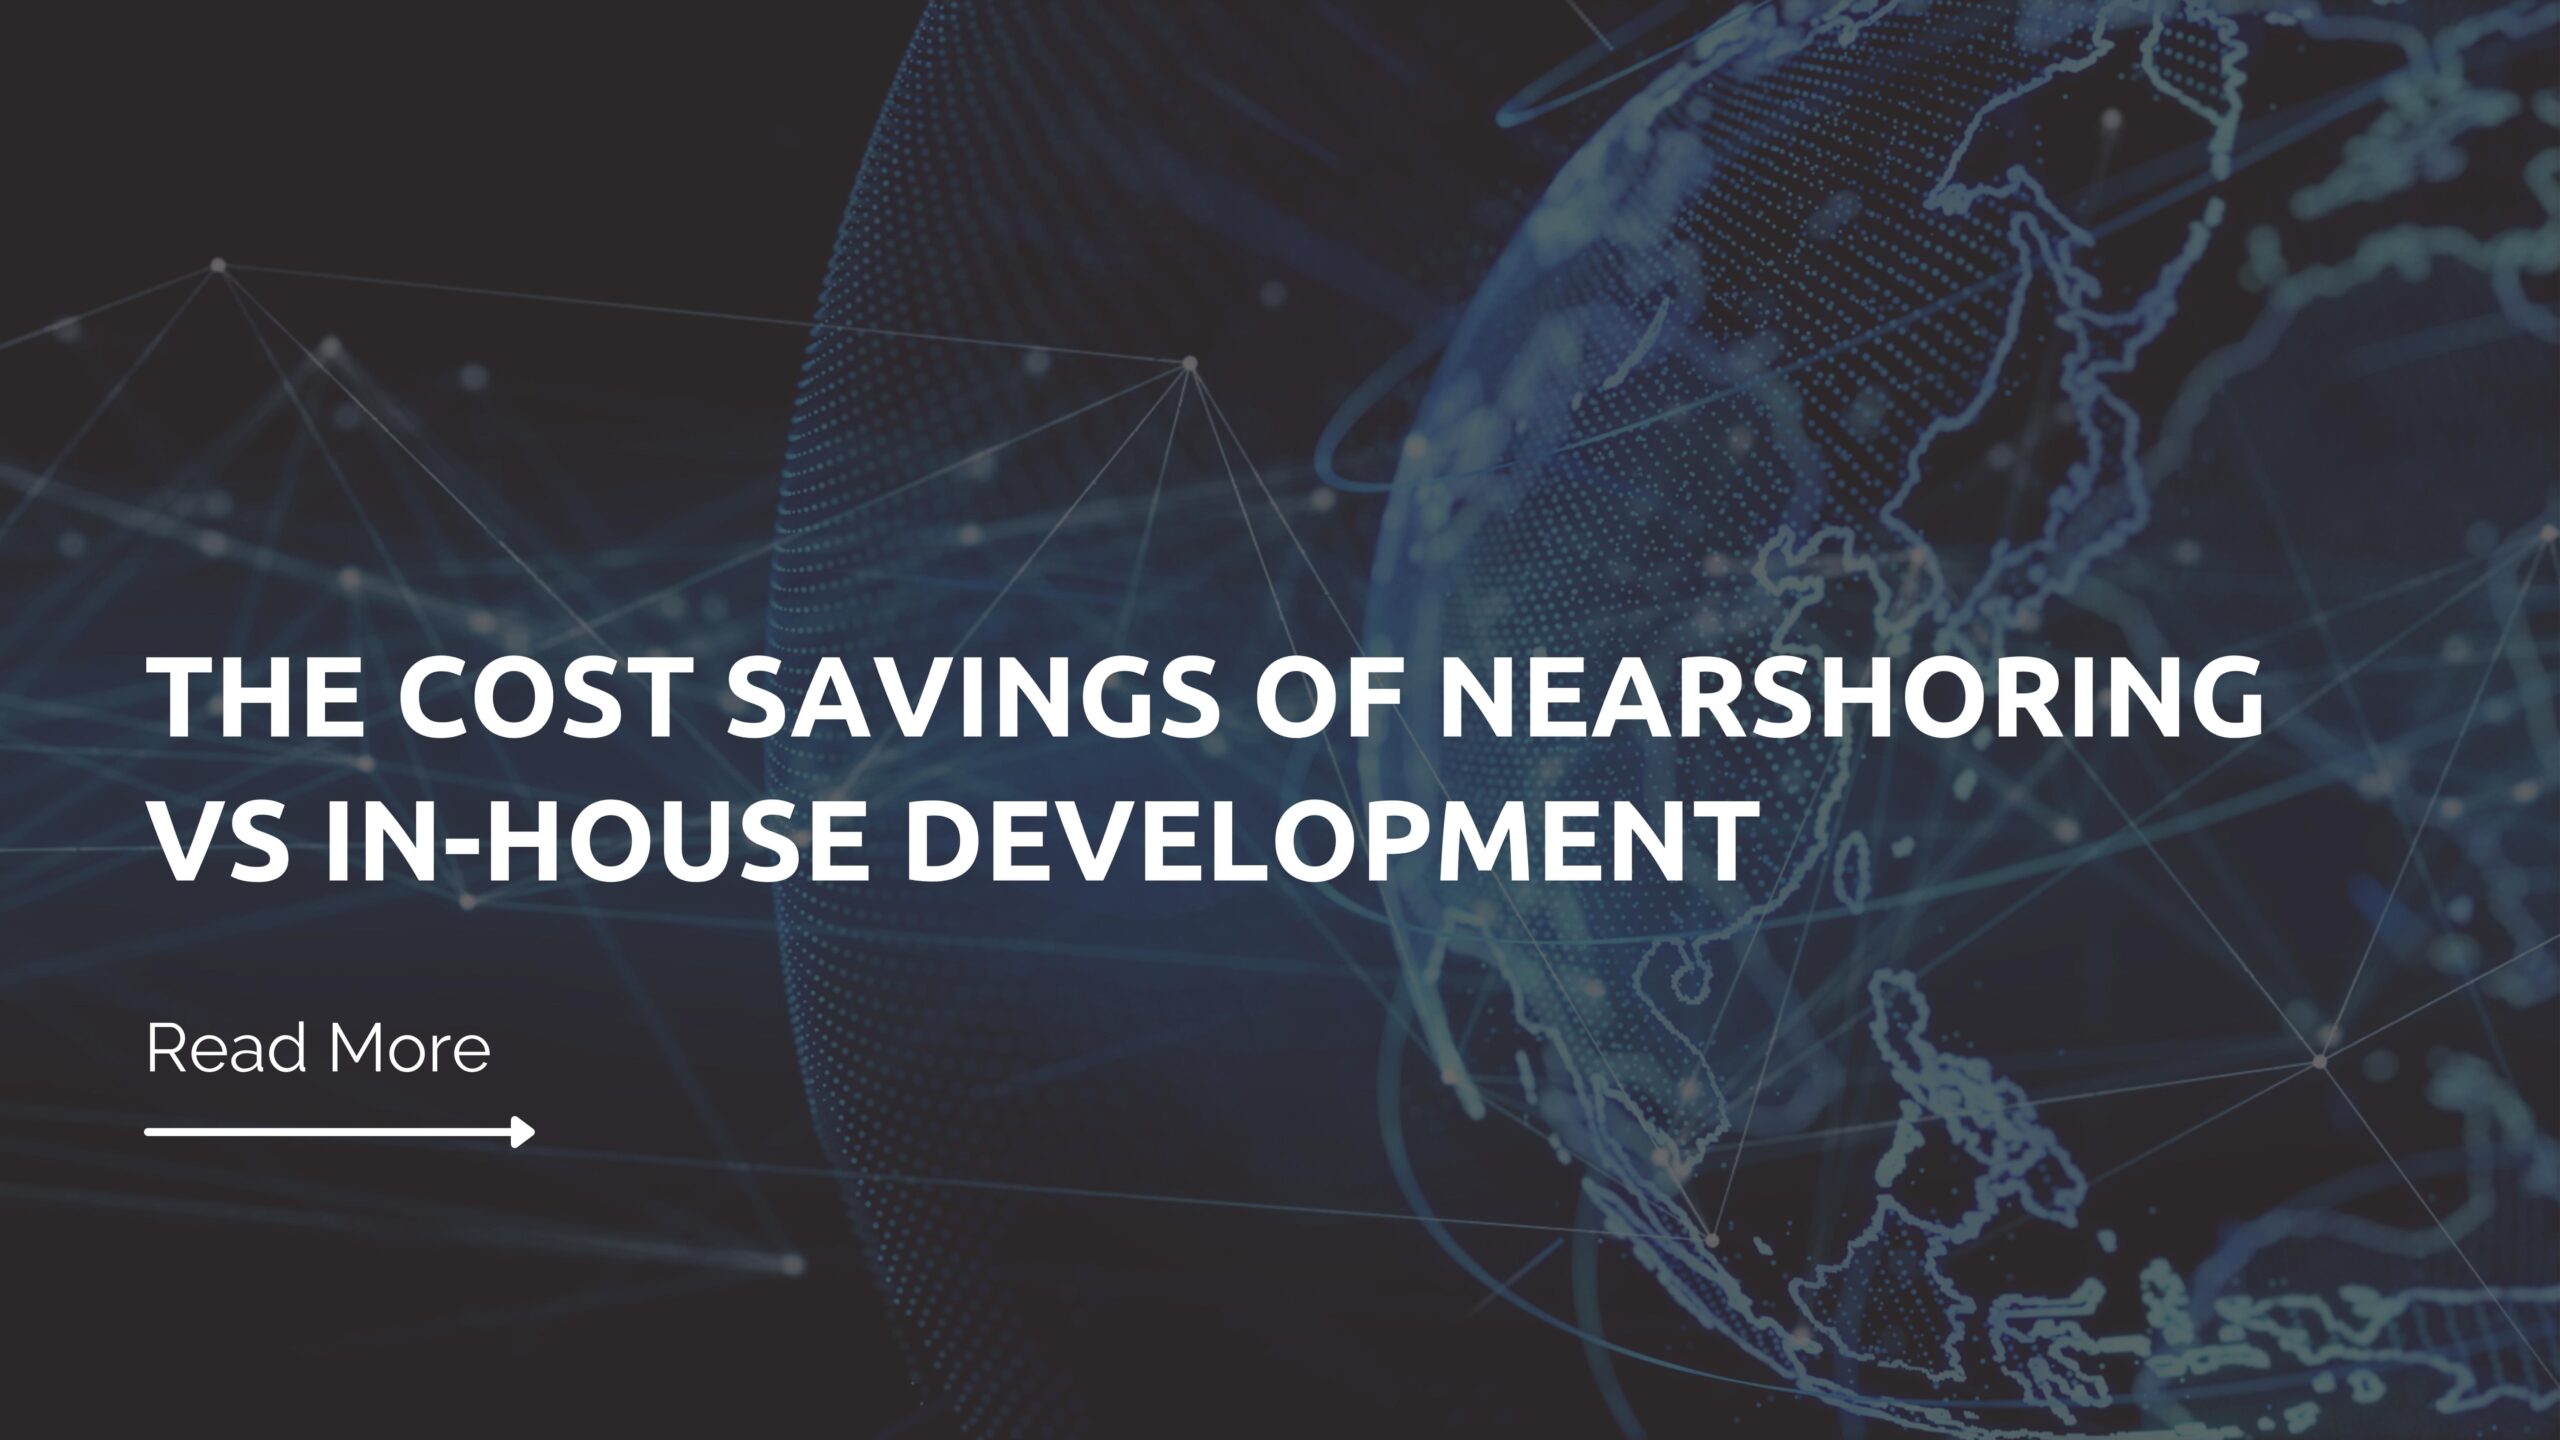 The Cost Savings of Nearshoring vs. In-House Development